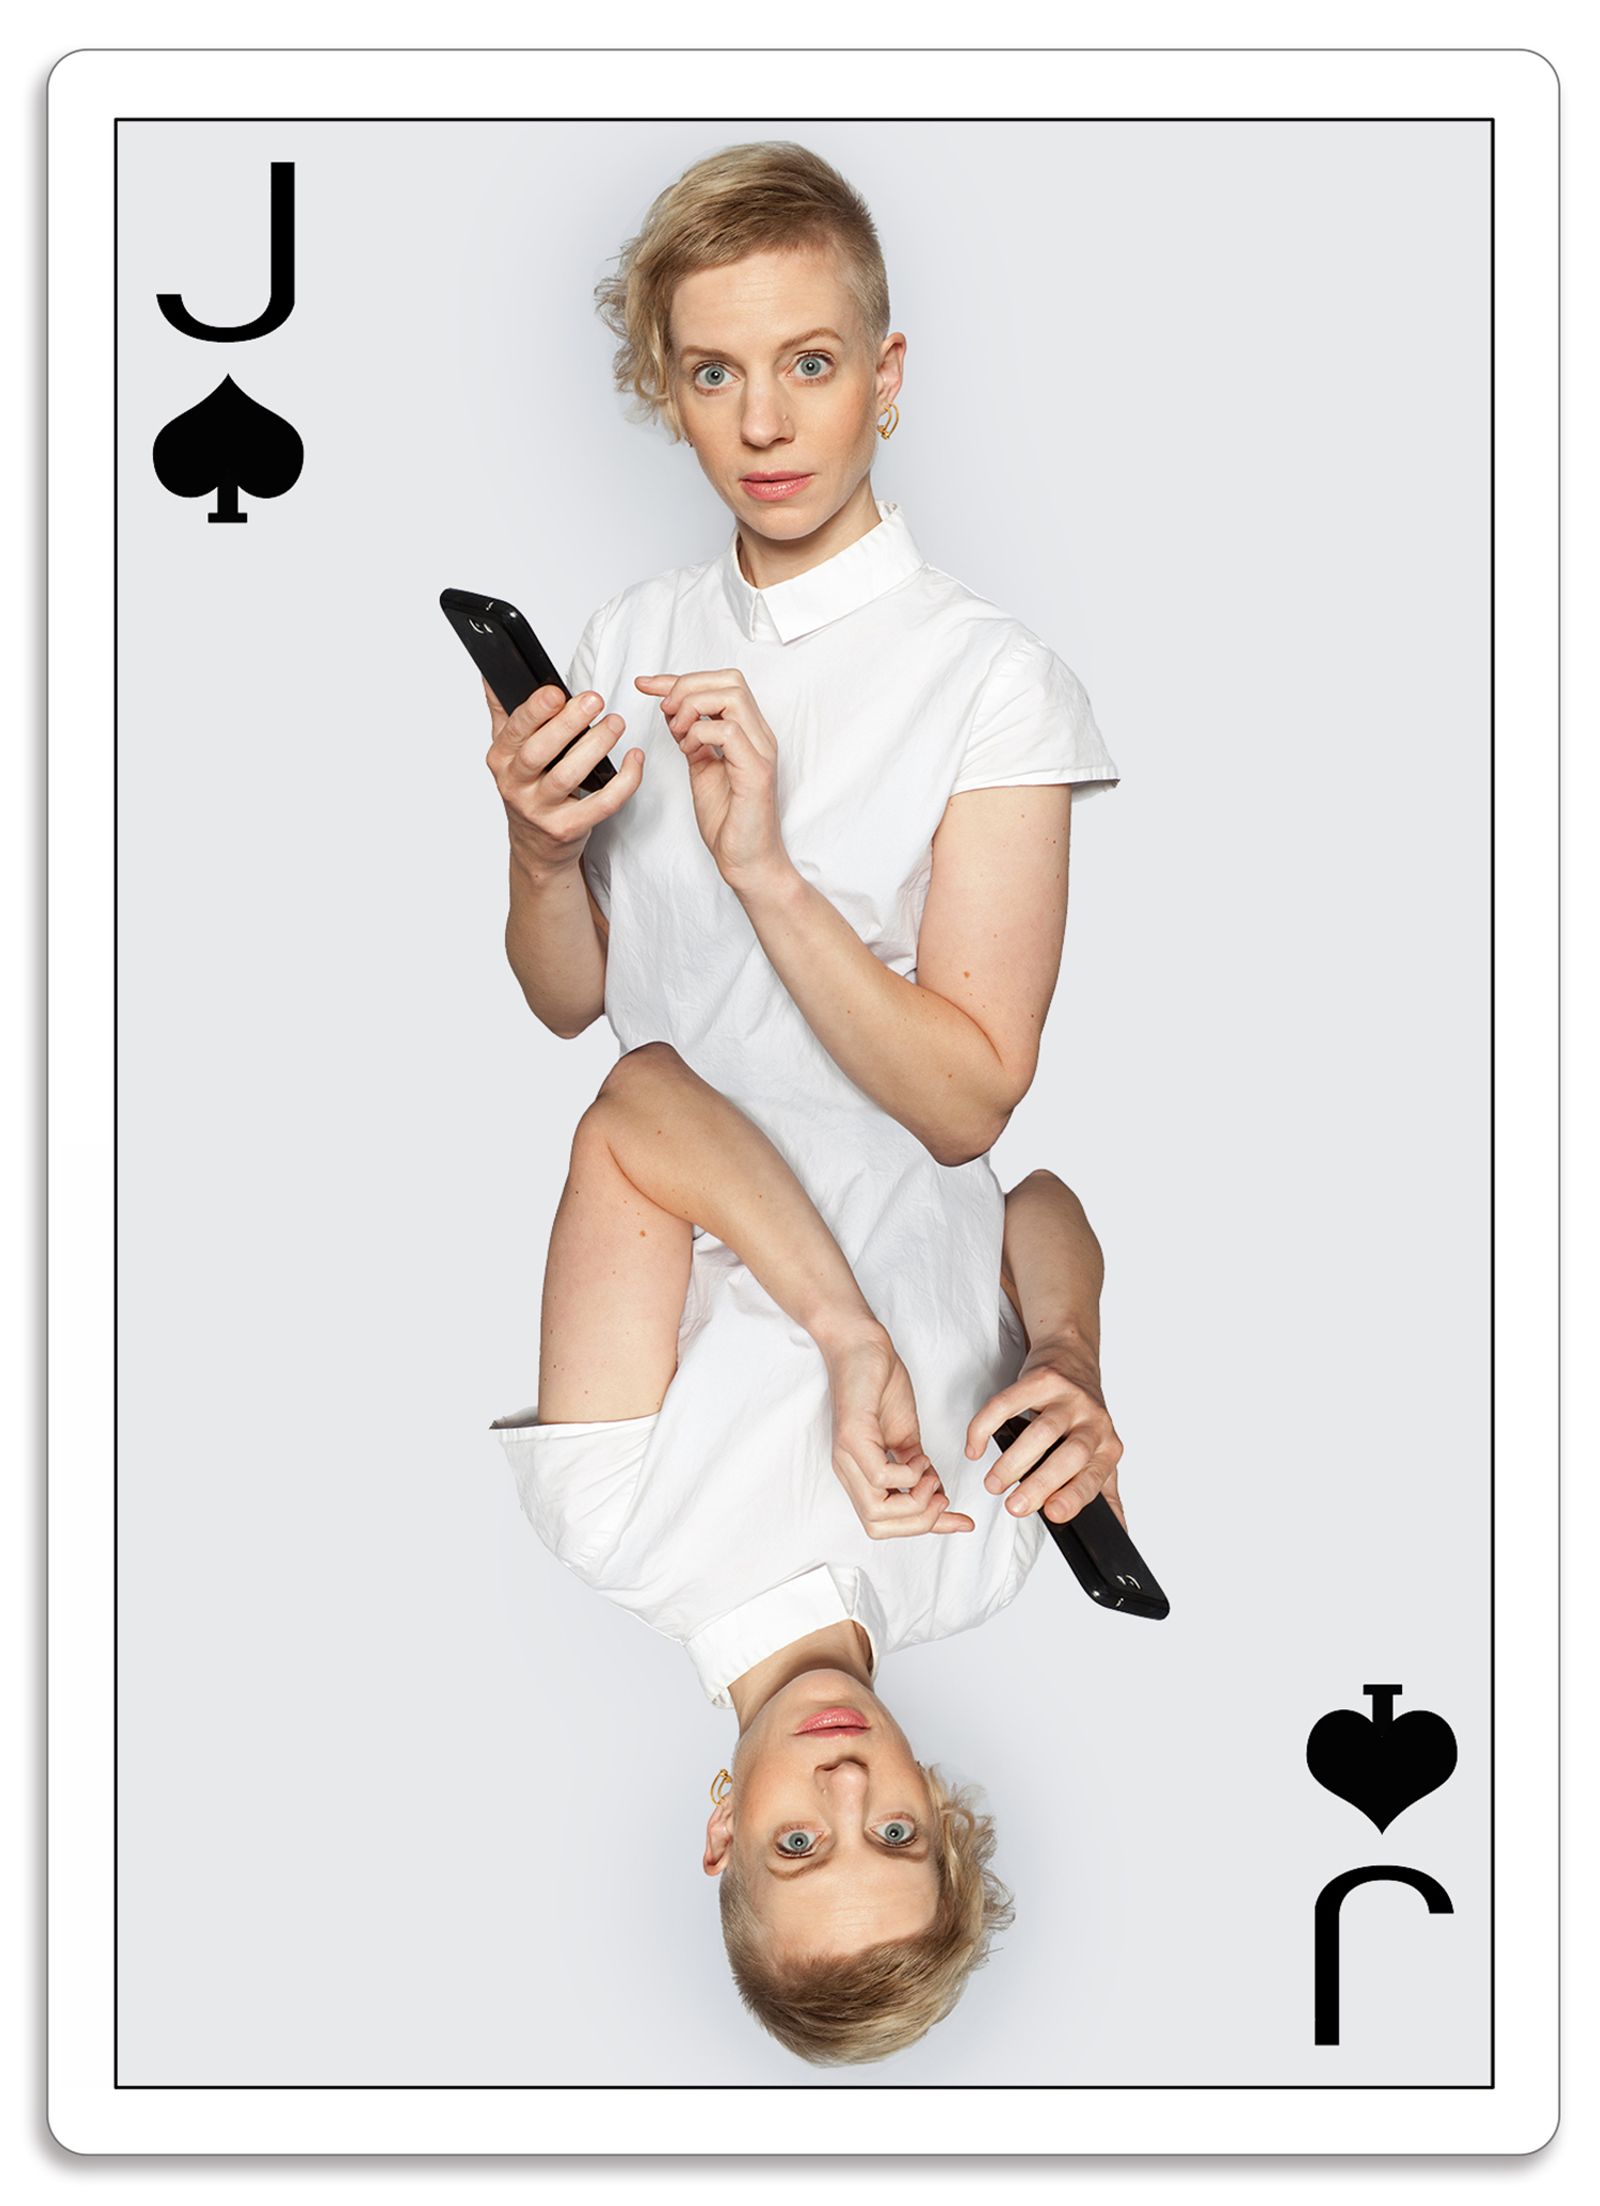 © Astrid Schulz - Image from the Playing Cards photography project